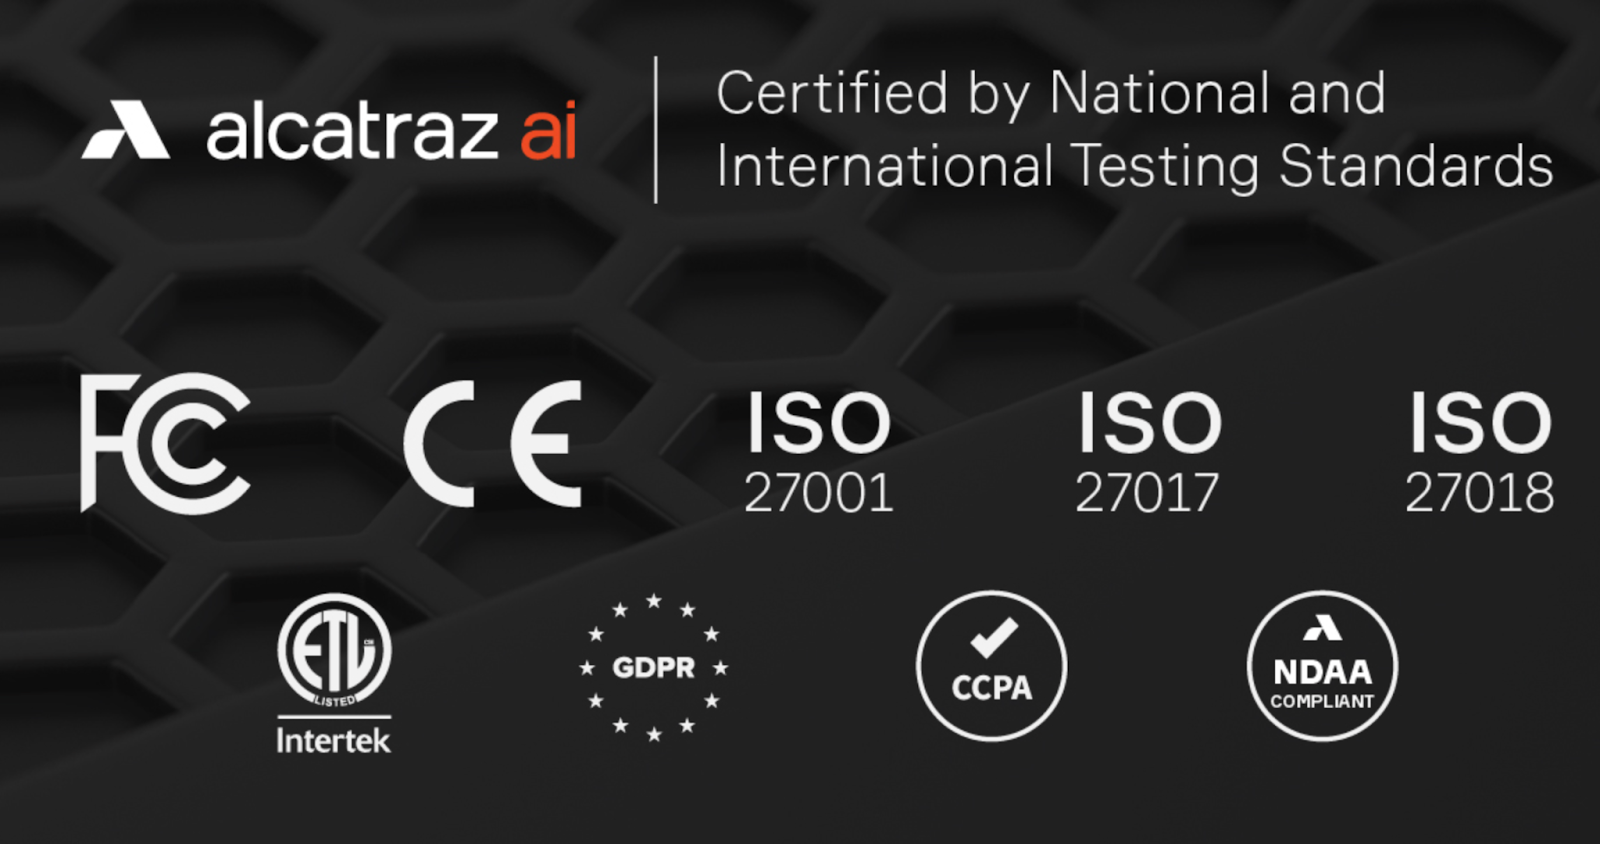 Alcatraz AI Certified by National and International Testing Standards